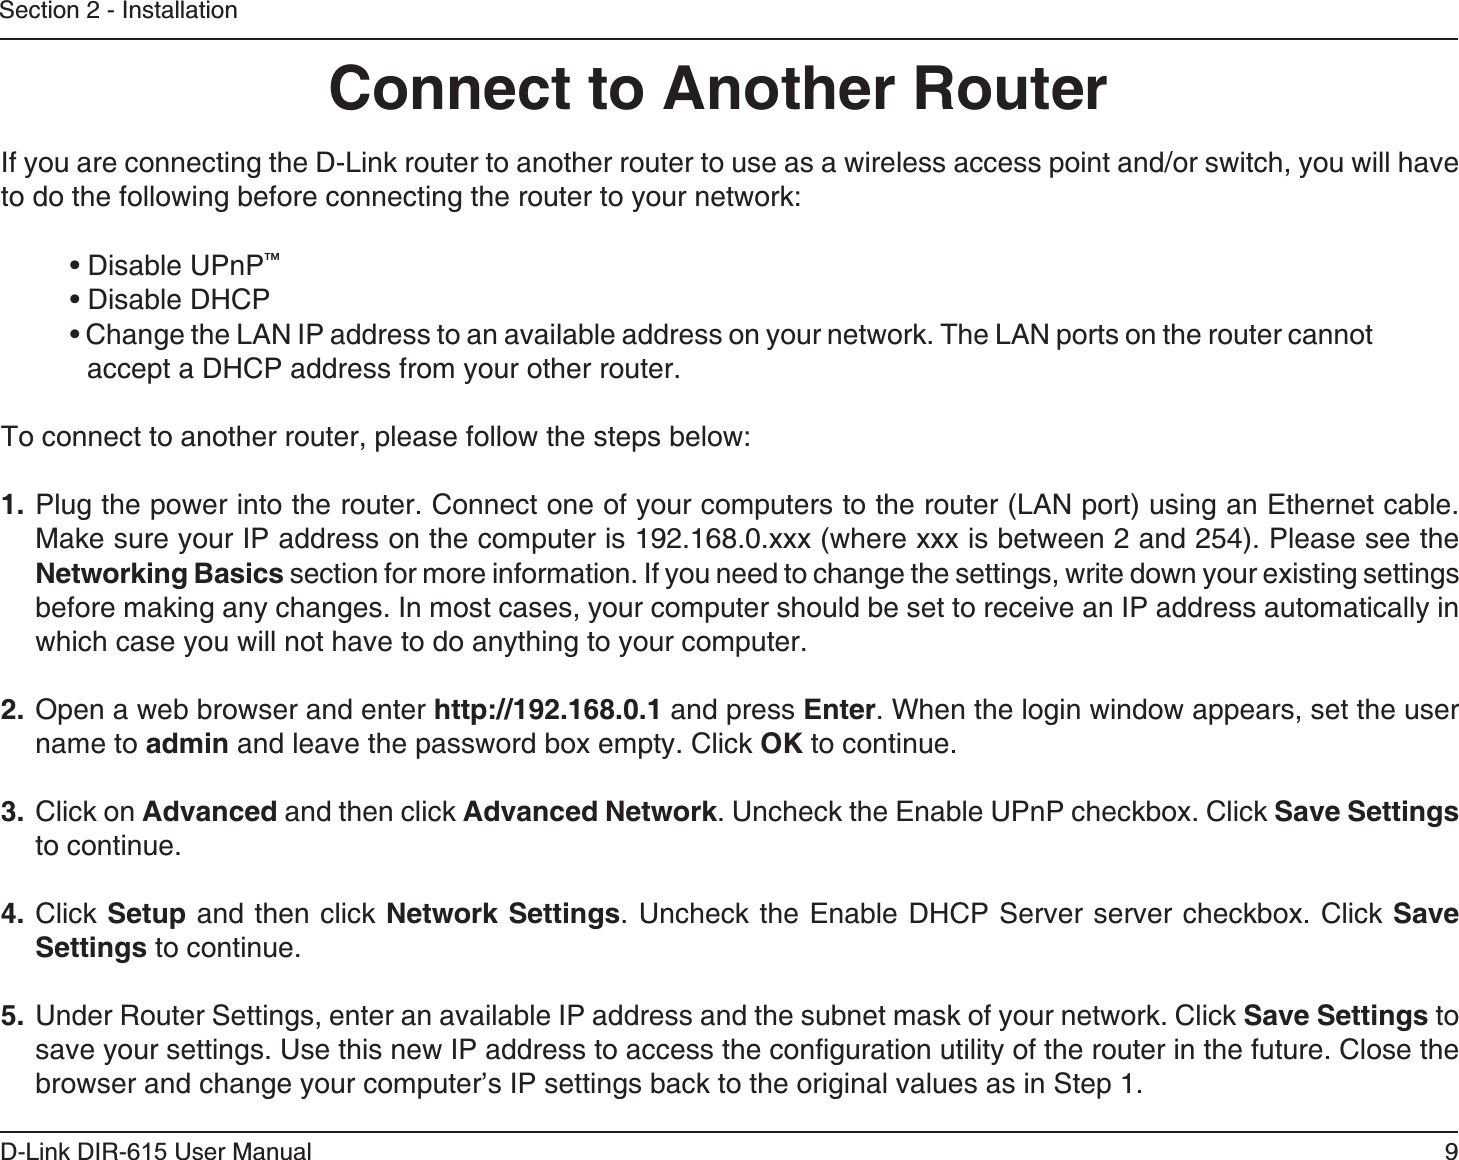 9D-Link DIR-6 User ManualSection 2 - InstallationIf you are connecting the D-Link router to another router to use as a wireless access point and/or switch, you will have to do the following before connecting the router to your network:™accept a DHCP address from your other router.To connect to another router, please follow the steps below:1. Plug the power into the router. Connect one of your computers to the router (LAN port) using an Ethernet cable. Make sure your IP address on the computer is 192.168.0.xxx (where xxx is between 2 and 254). Please see the  section for more information. If you need to change the settings, write down your existing settings before making any changes. In most cases, your computer should be set to receive an IP address automatically in which case you will not have to do anything to your computer. Open a web browser and enter  and press . When the login window appears, set the user name to  and leave the password box empty. Click  to continue.3. Click on  and then click . Uncheck the Enable UPnP checkbox. Click  to continue. 4. Click  and then click . Uncheck the Enable DHCP Server server checkbox. Click  to continue.5.  Under Router Settings, enter an available IP address and the subnet mask of your network. Click  to save your settings. Use this new IP address to access the configuration utility of the router in the future. Close the browser and change your computer’s IP settings back to the original values as in Step 1.